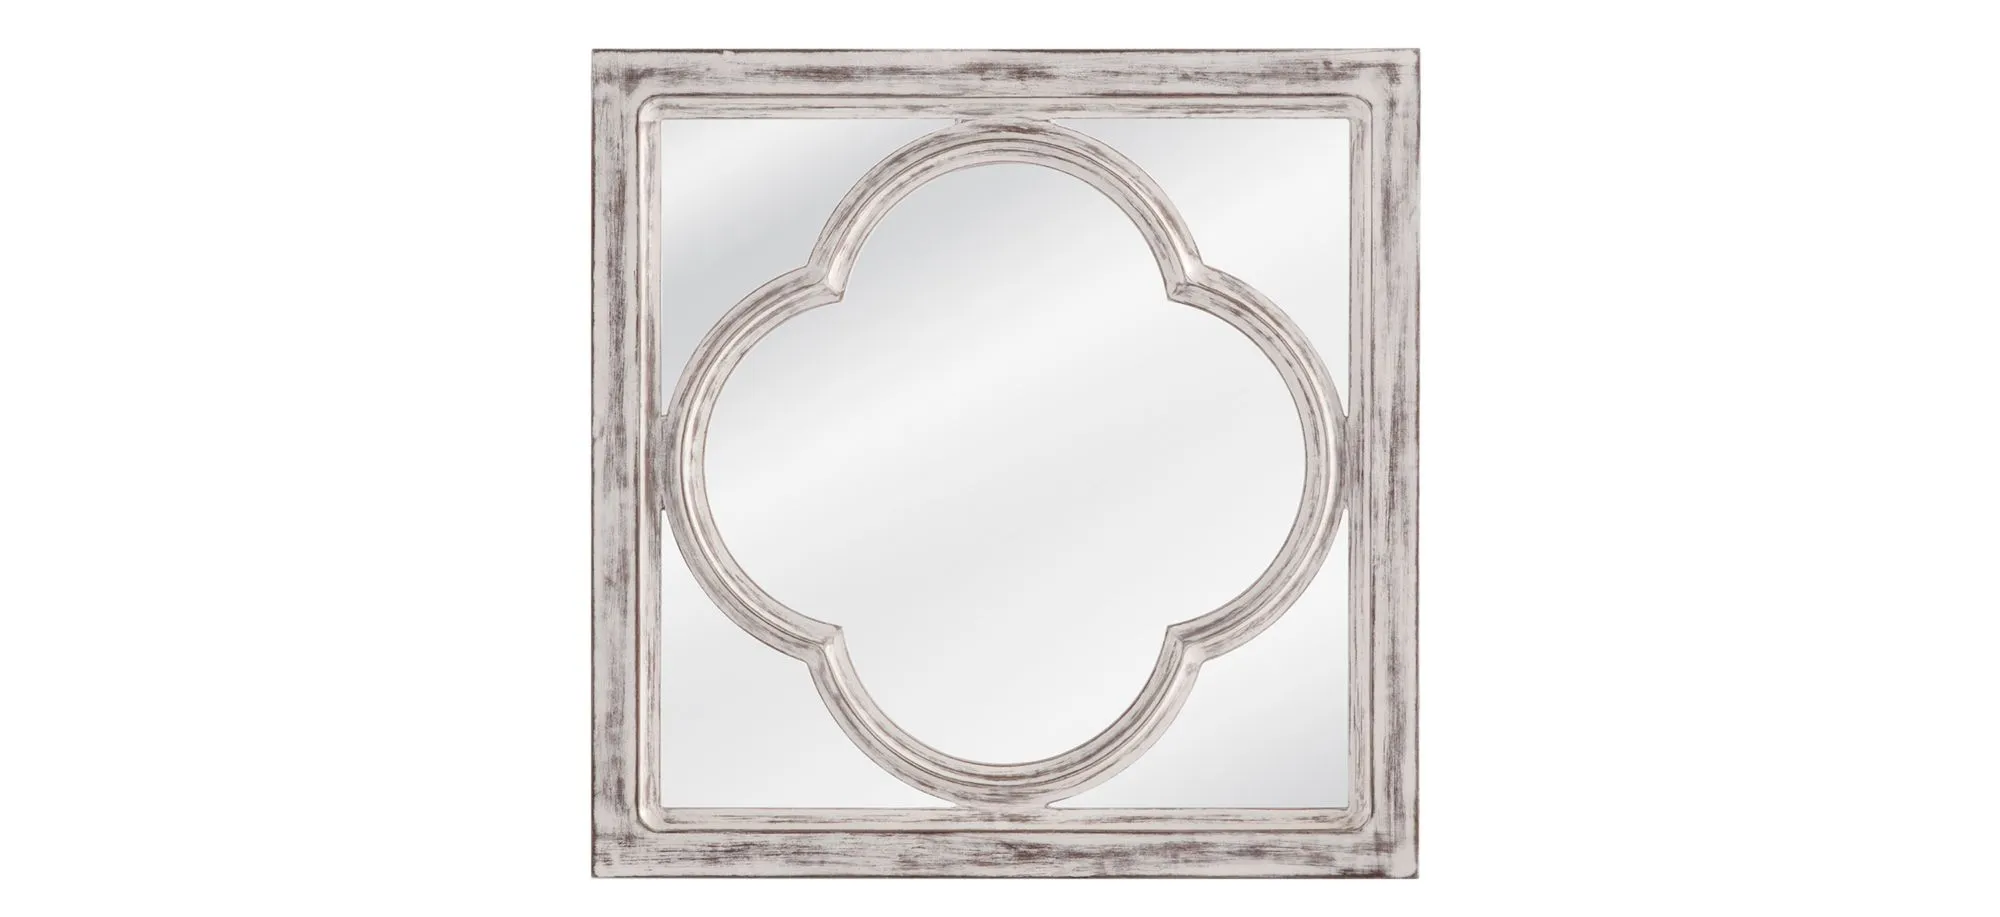 Sutter Wall Mirror in Distressed White by Bassett Mirror Co.